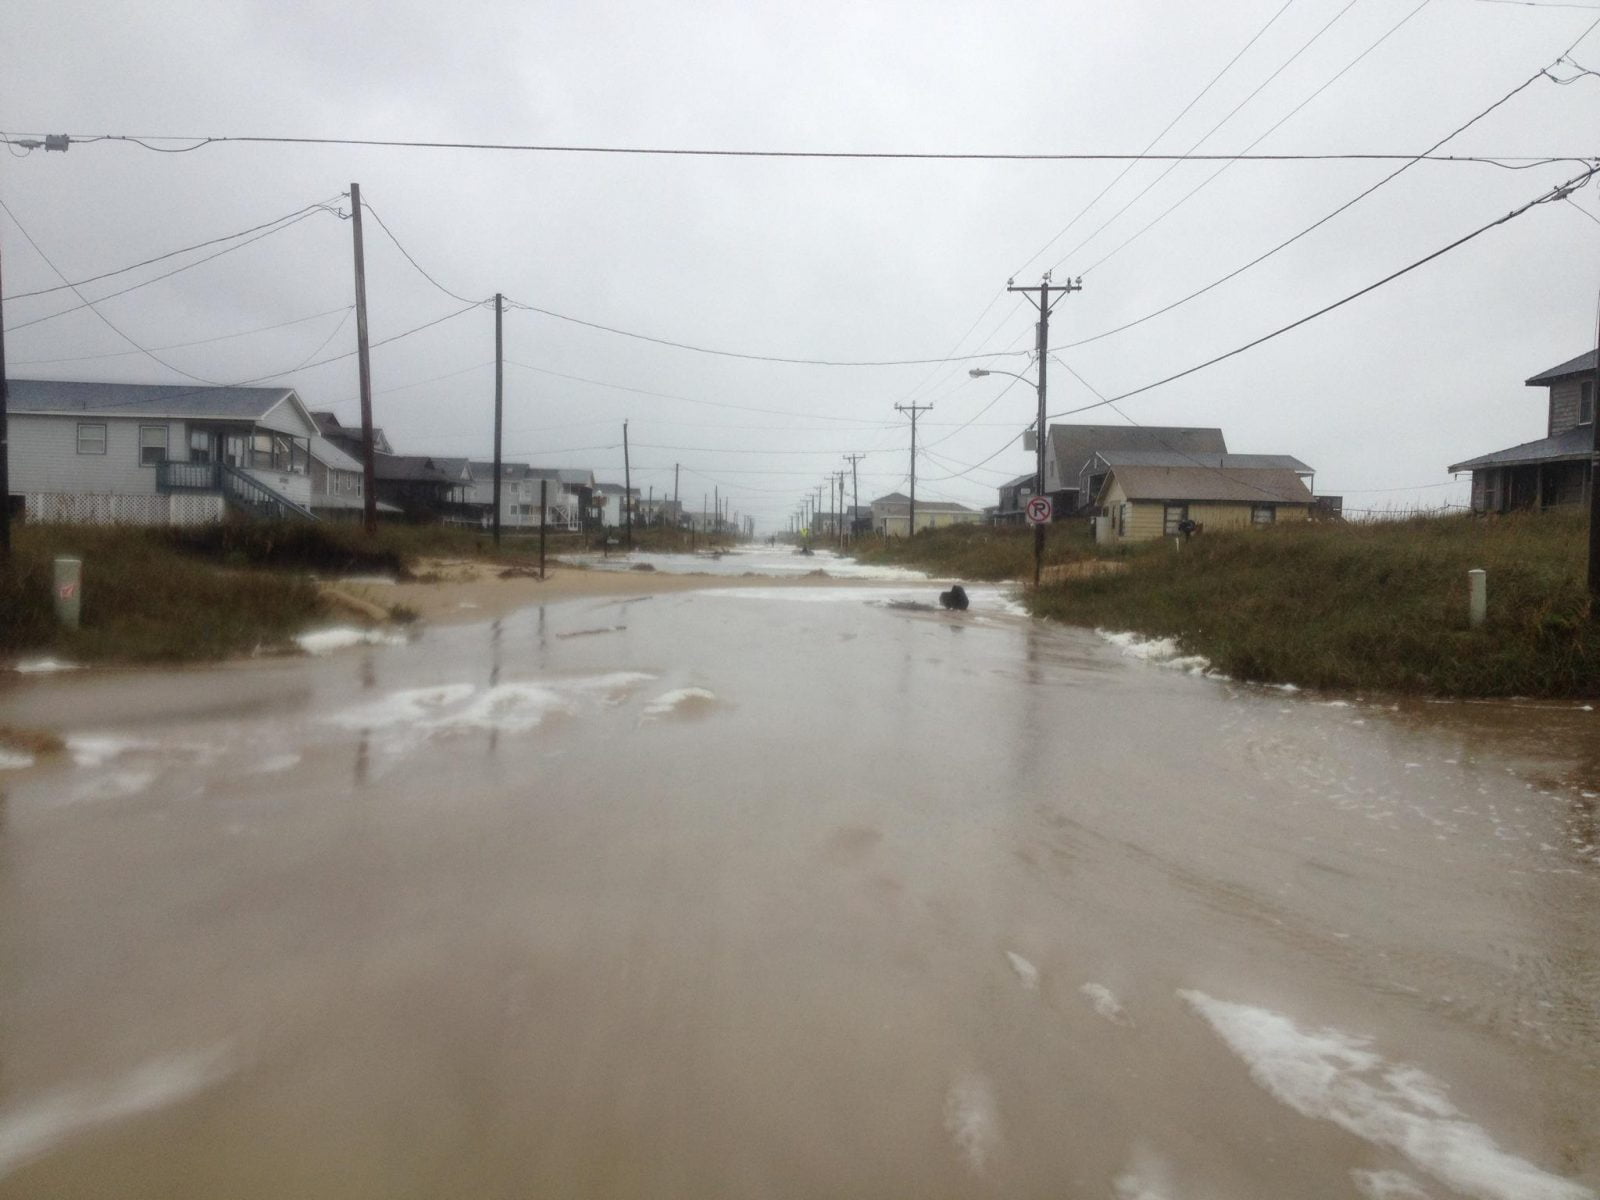 Hurricane Sandy Damage on the Outer Banks — Ilona Matteson